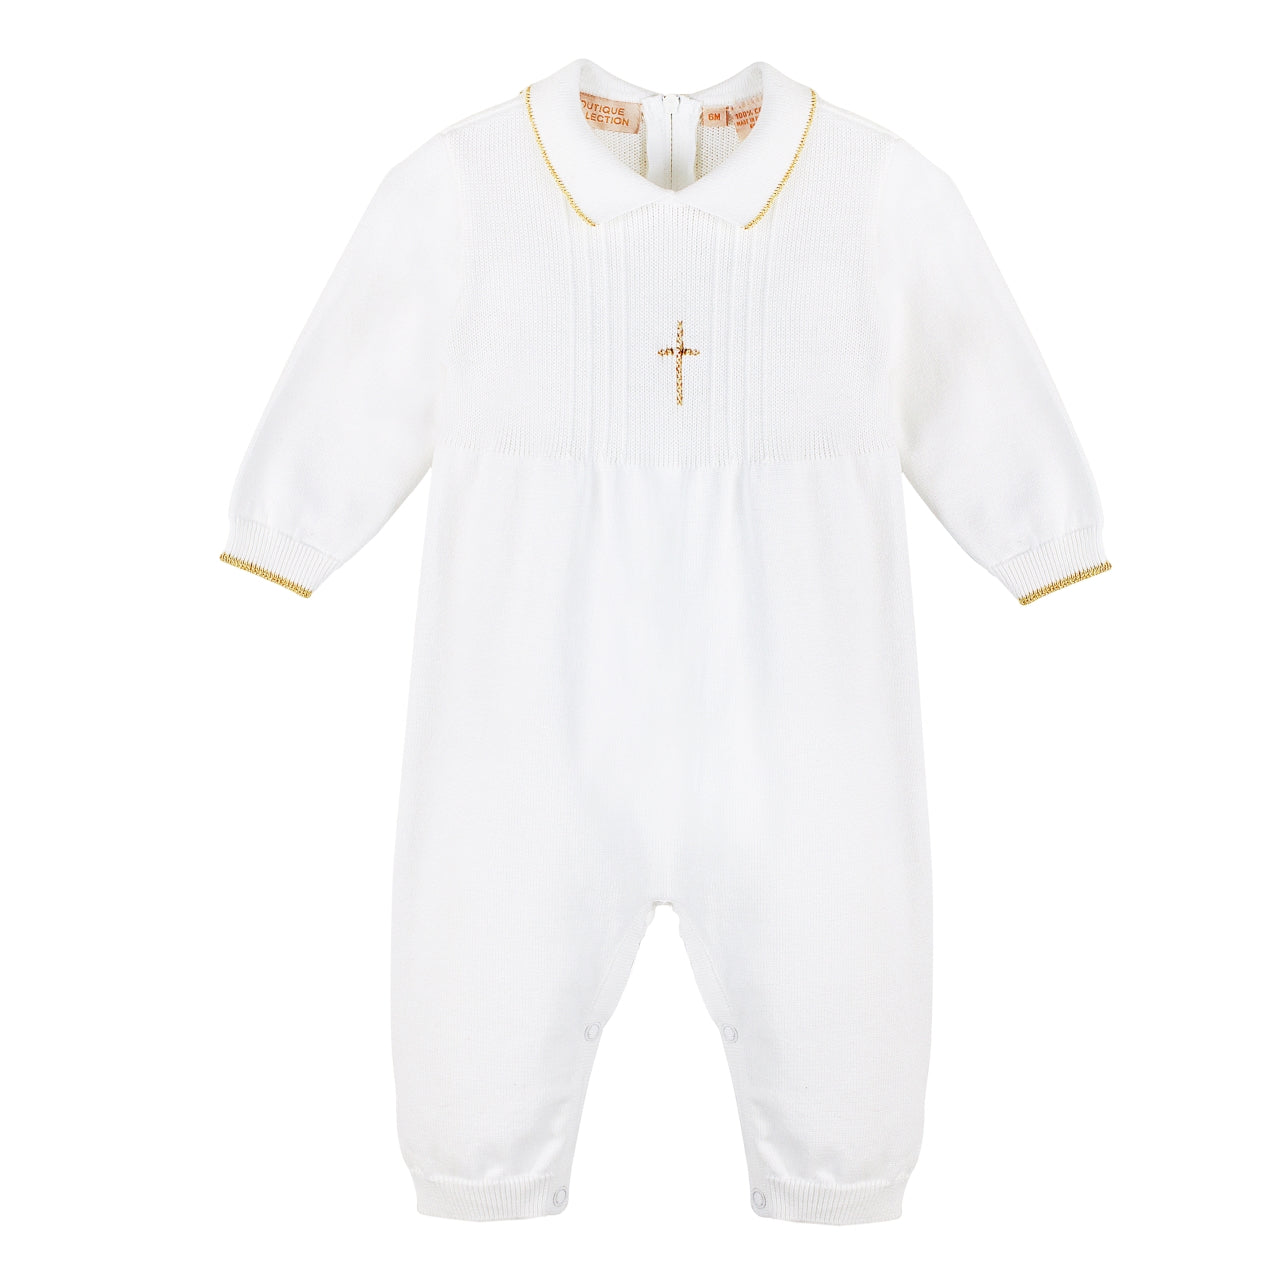 Knit Pearl Gold Cross Baby Boy Christening Outfit with Bonnet 2 - Imagewear